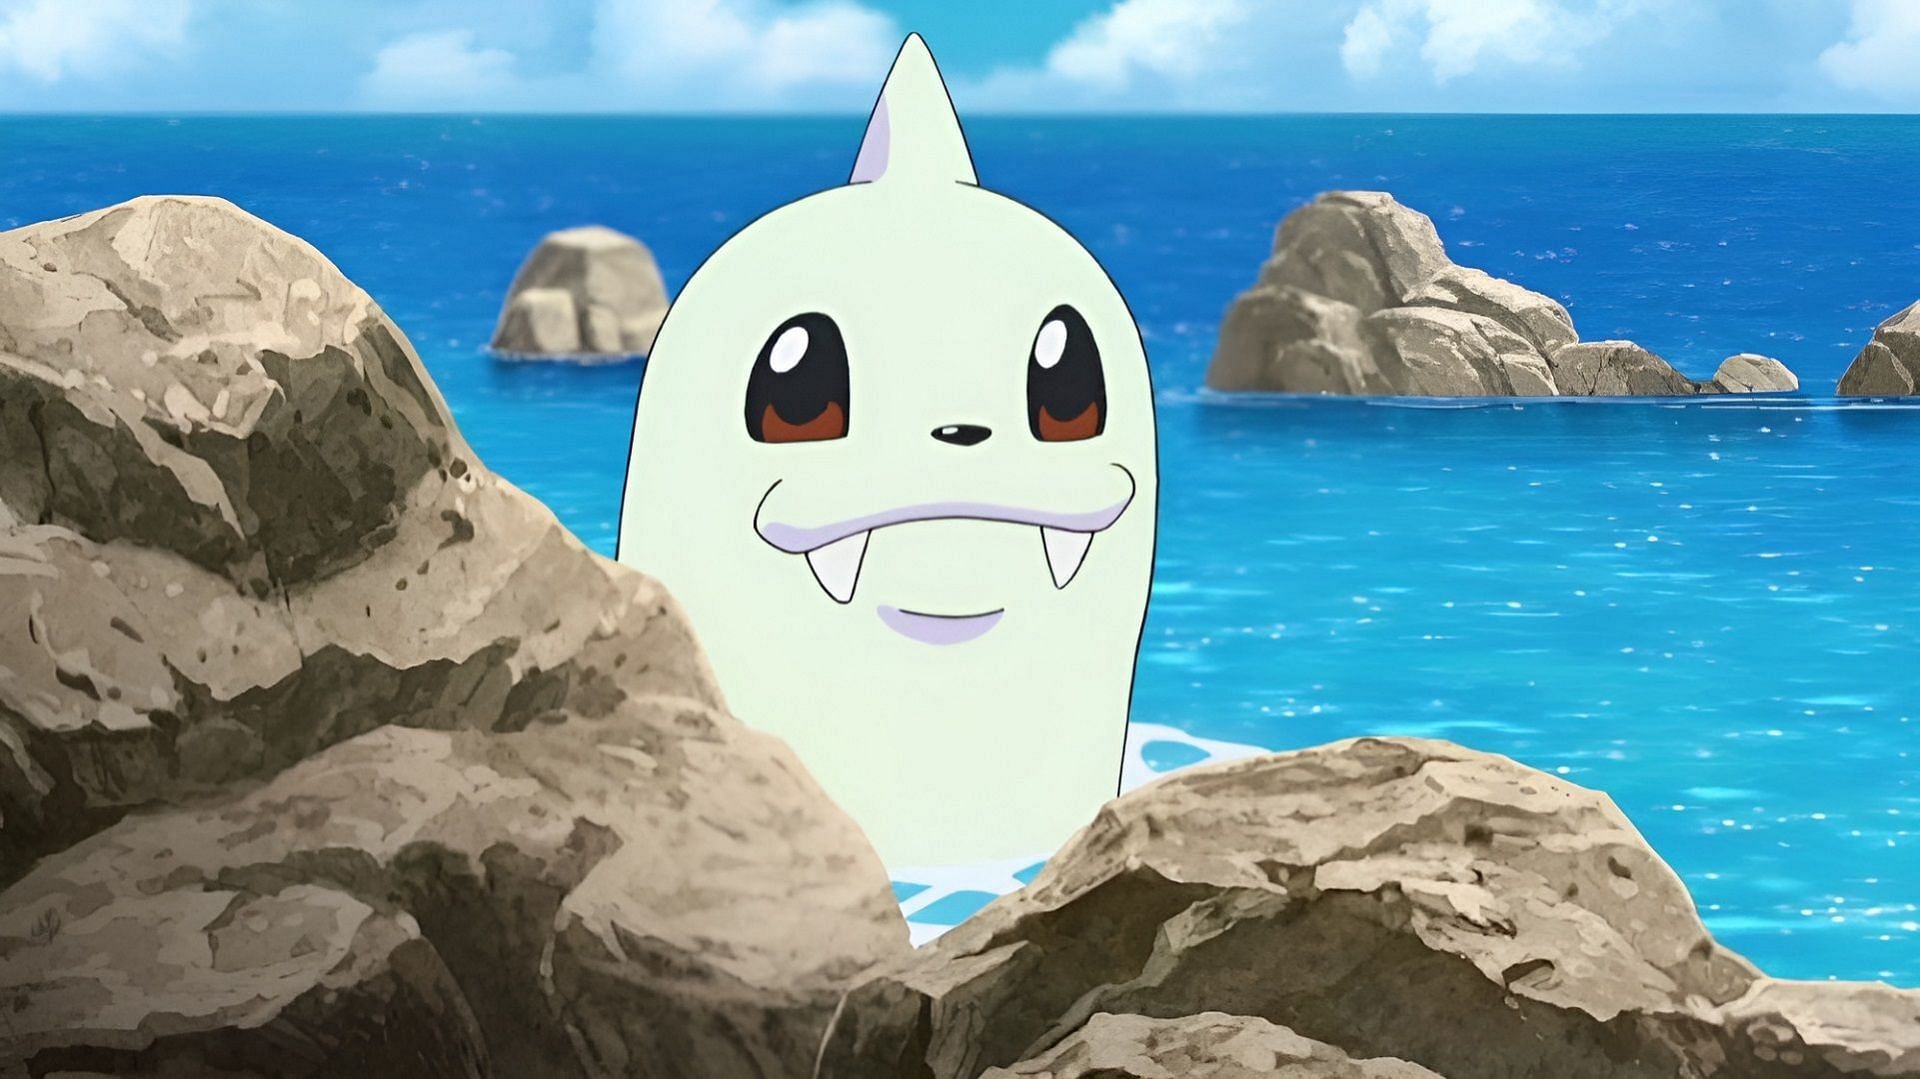 Dewgong was the Pokedle Classic answer for March 24, 2024 (Image via The Pokemon Company)